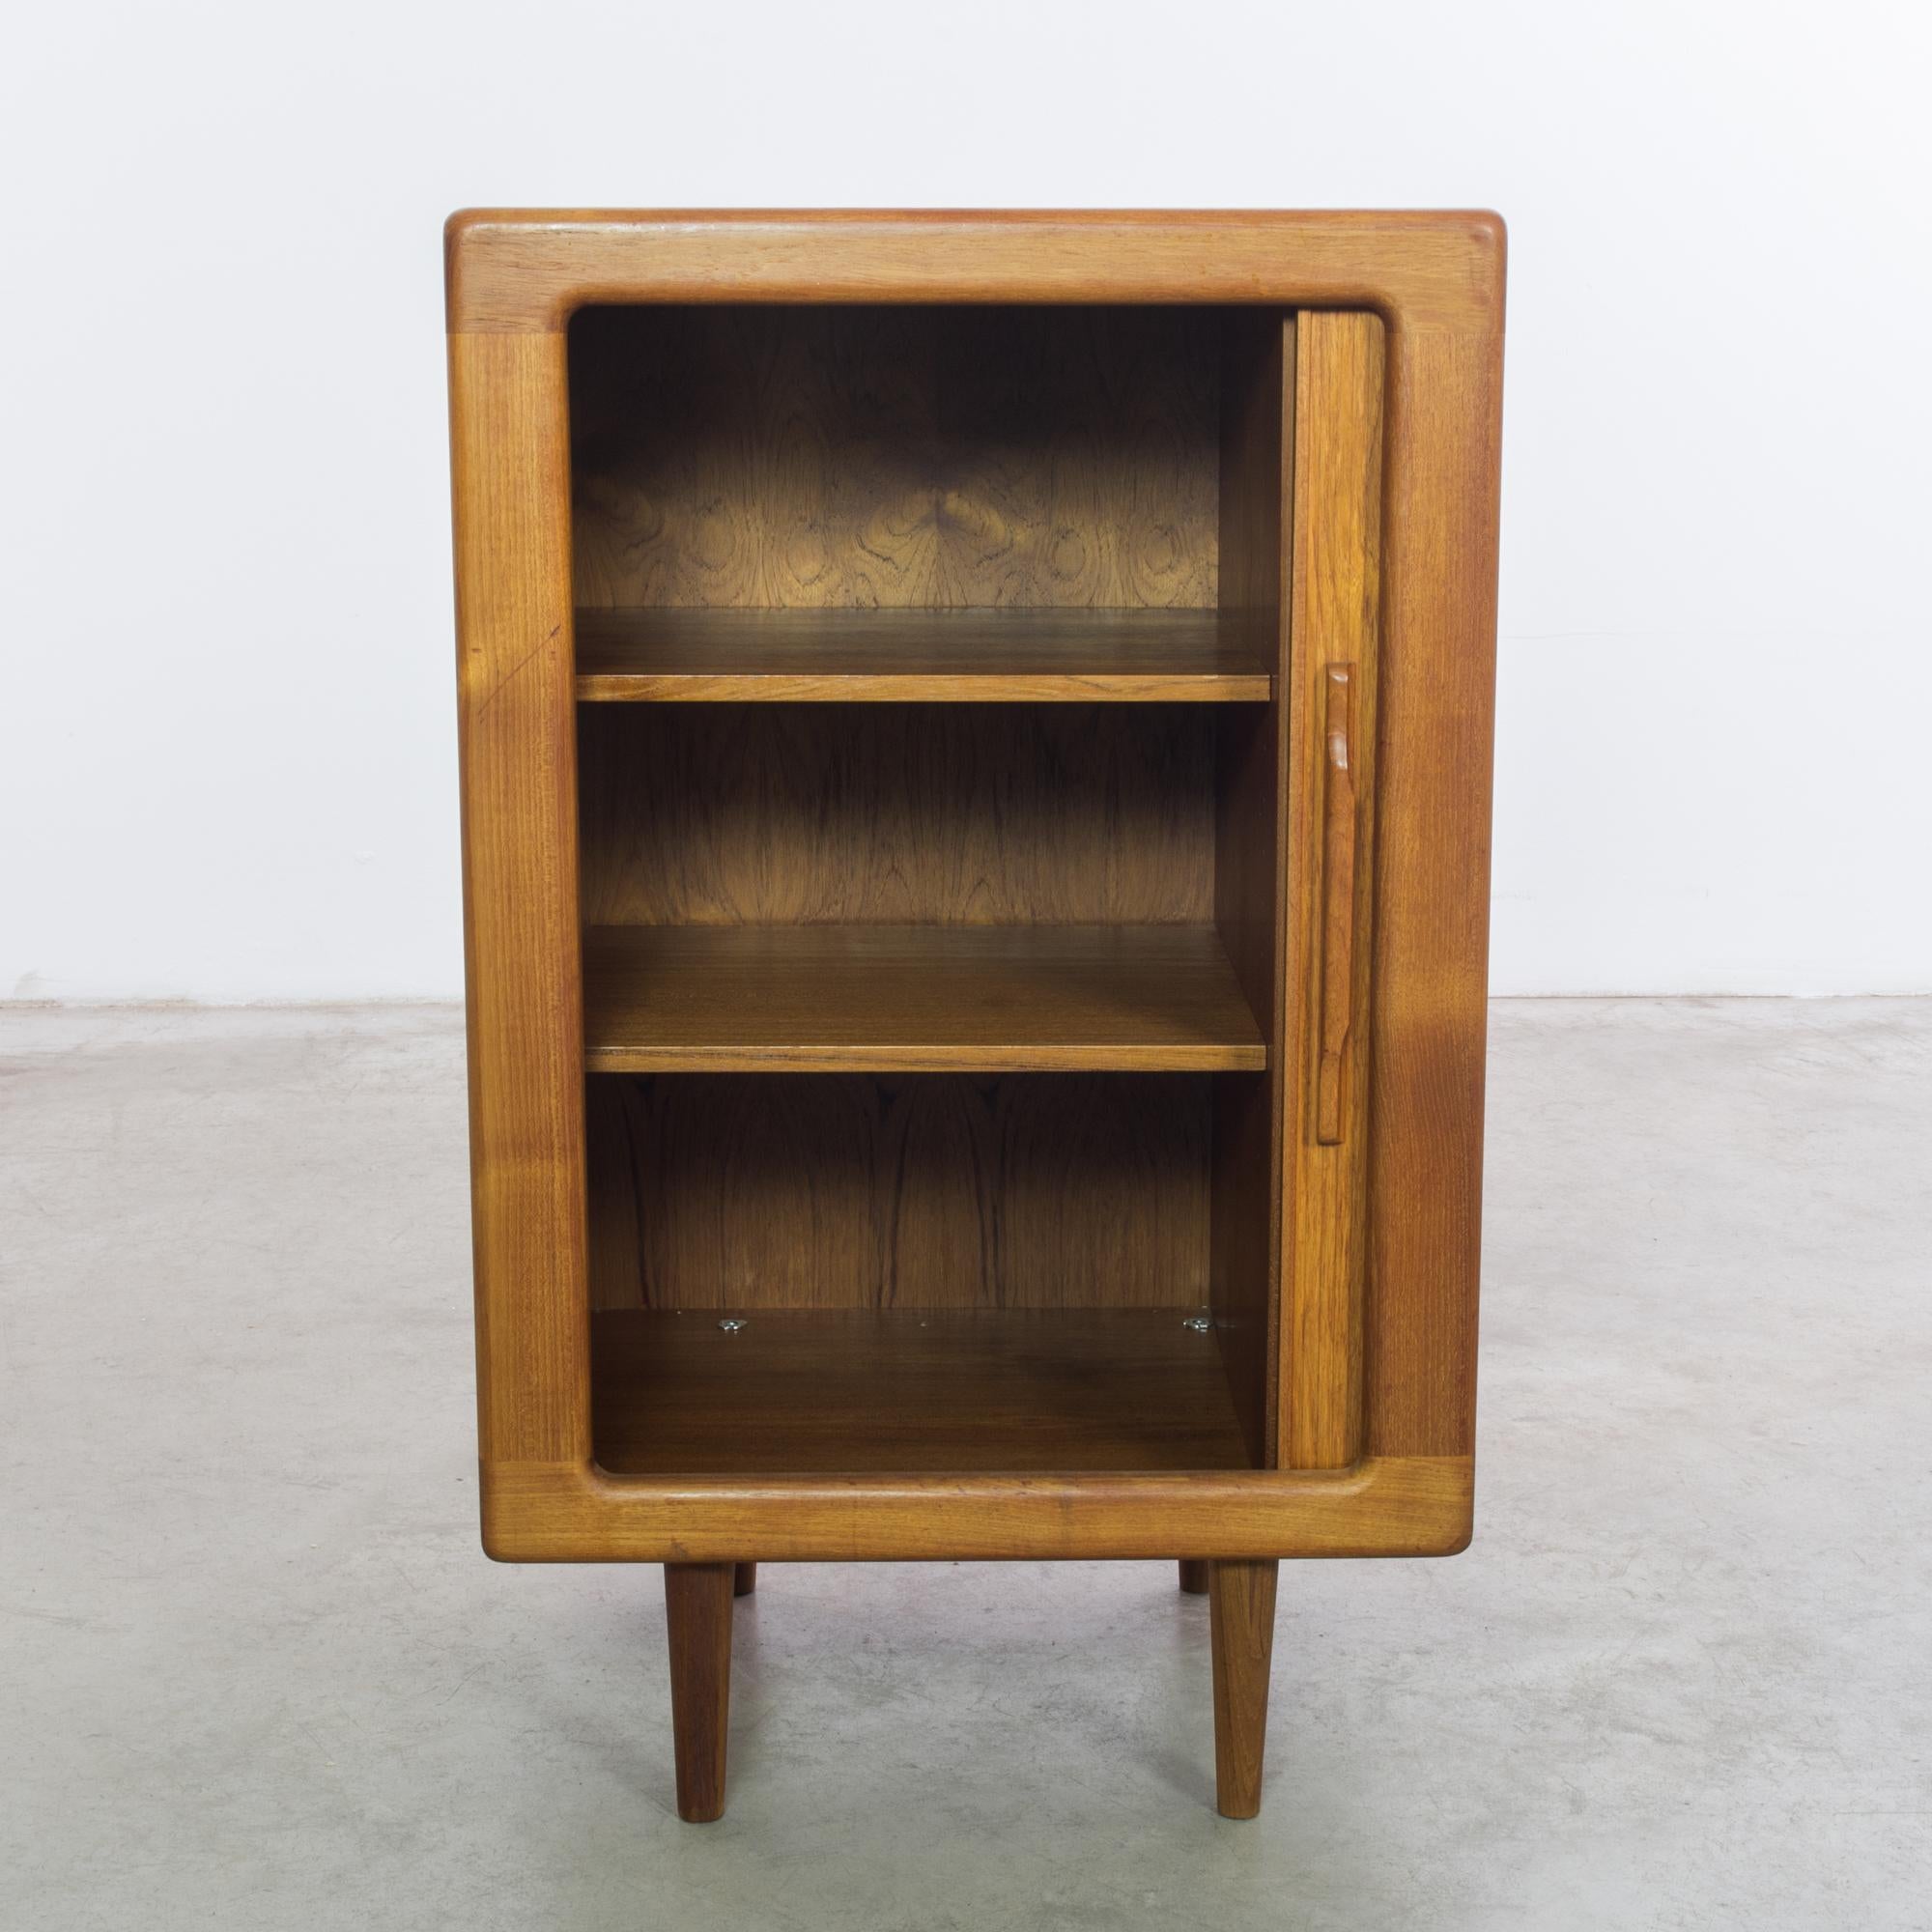 This 1970s Danish Teak Cabinet by Dyrlund epitomizes the era's penchant for minimalist design and superior craftsmanship. Constructed from the highest quality teak, its warm tones and smooth grain offer a welcoming presence in any room. The